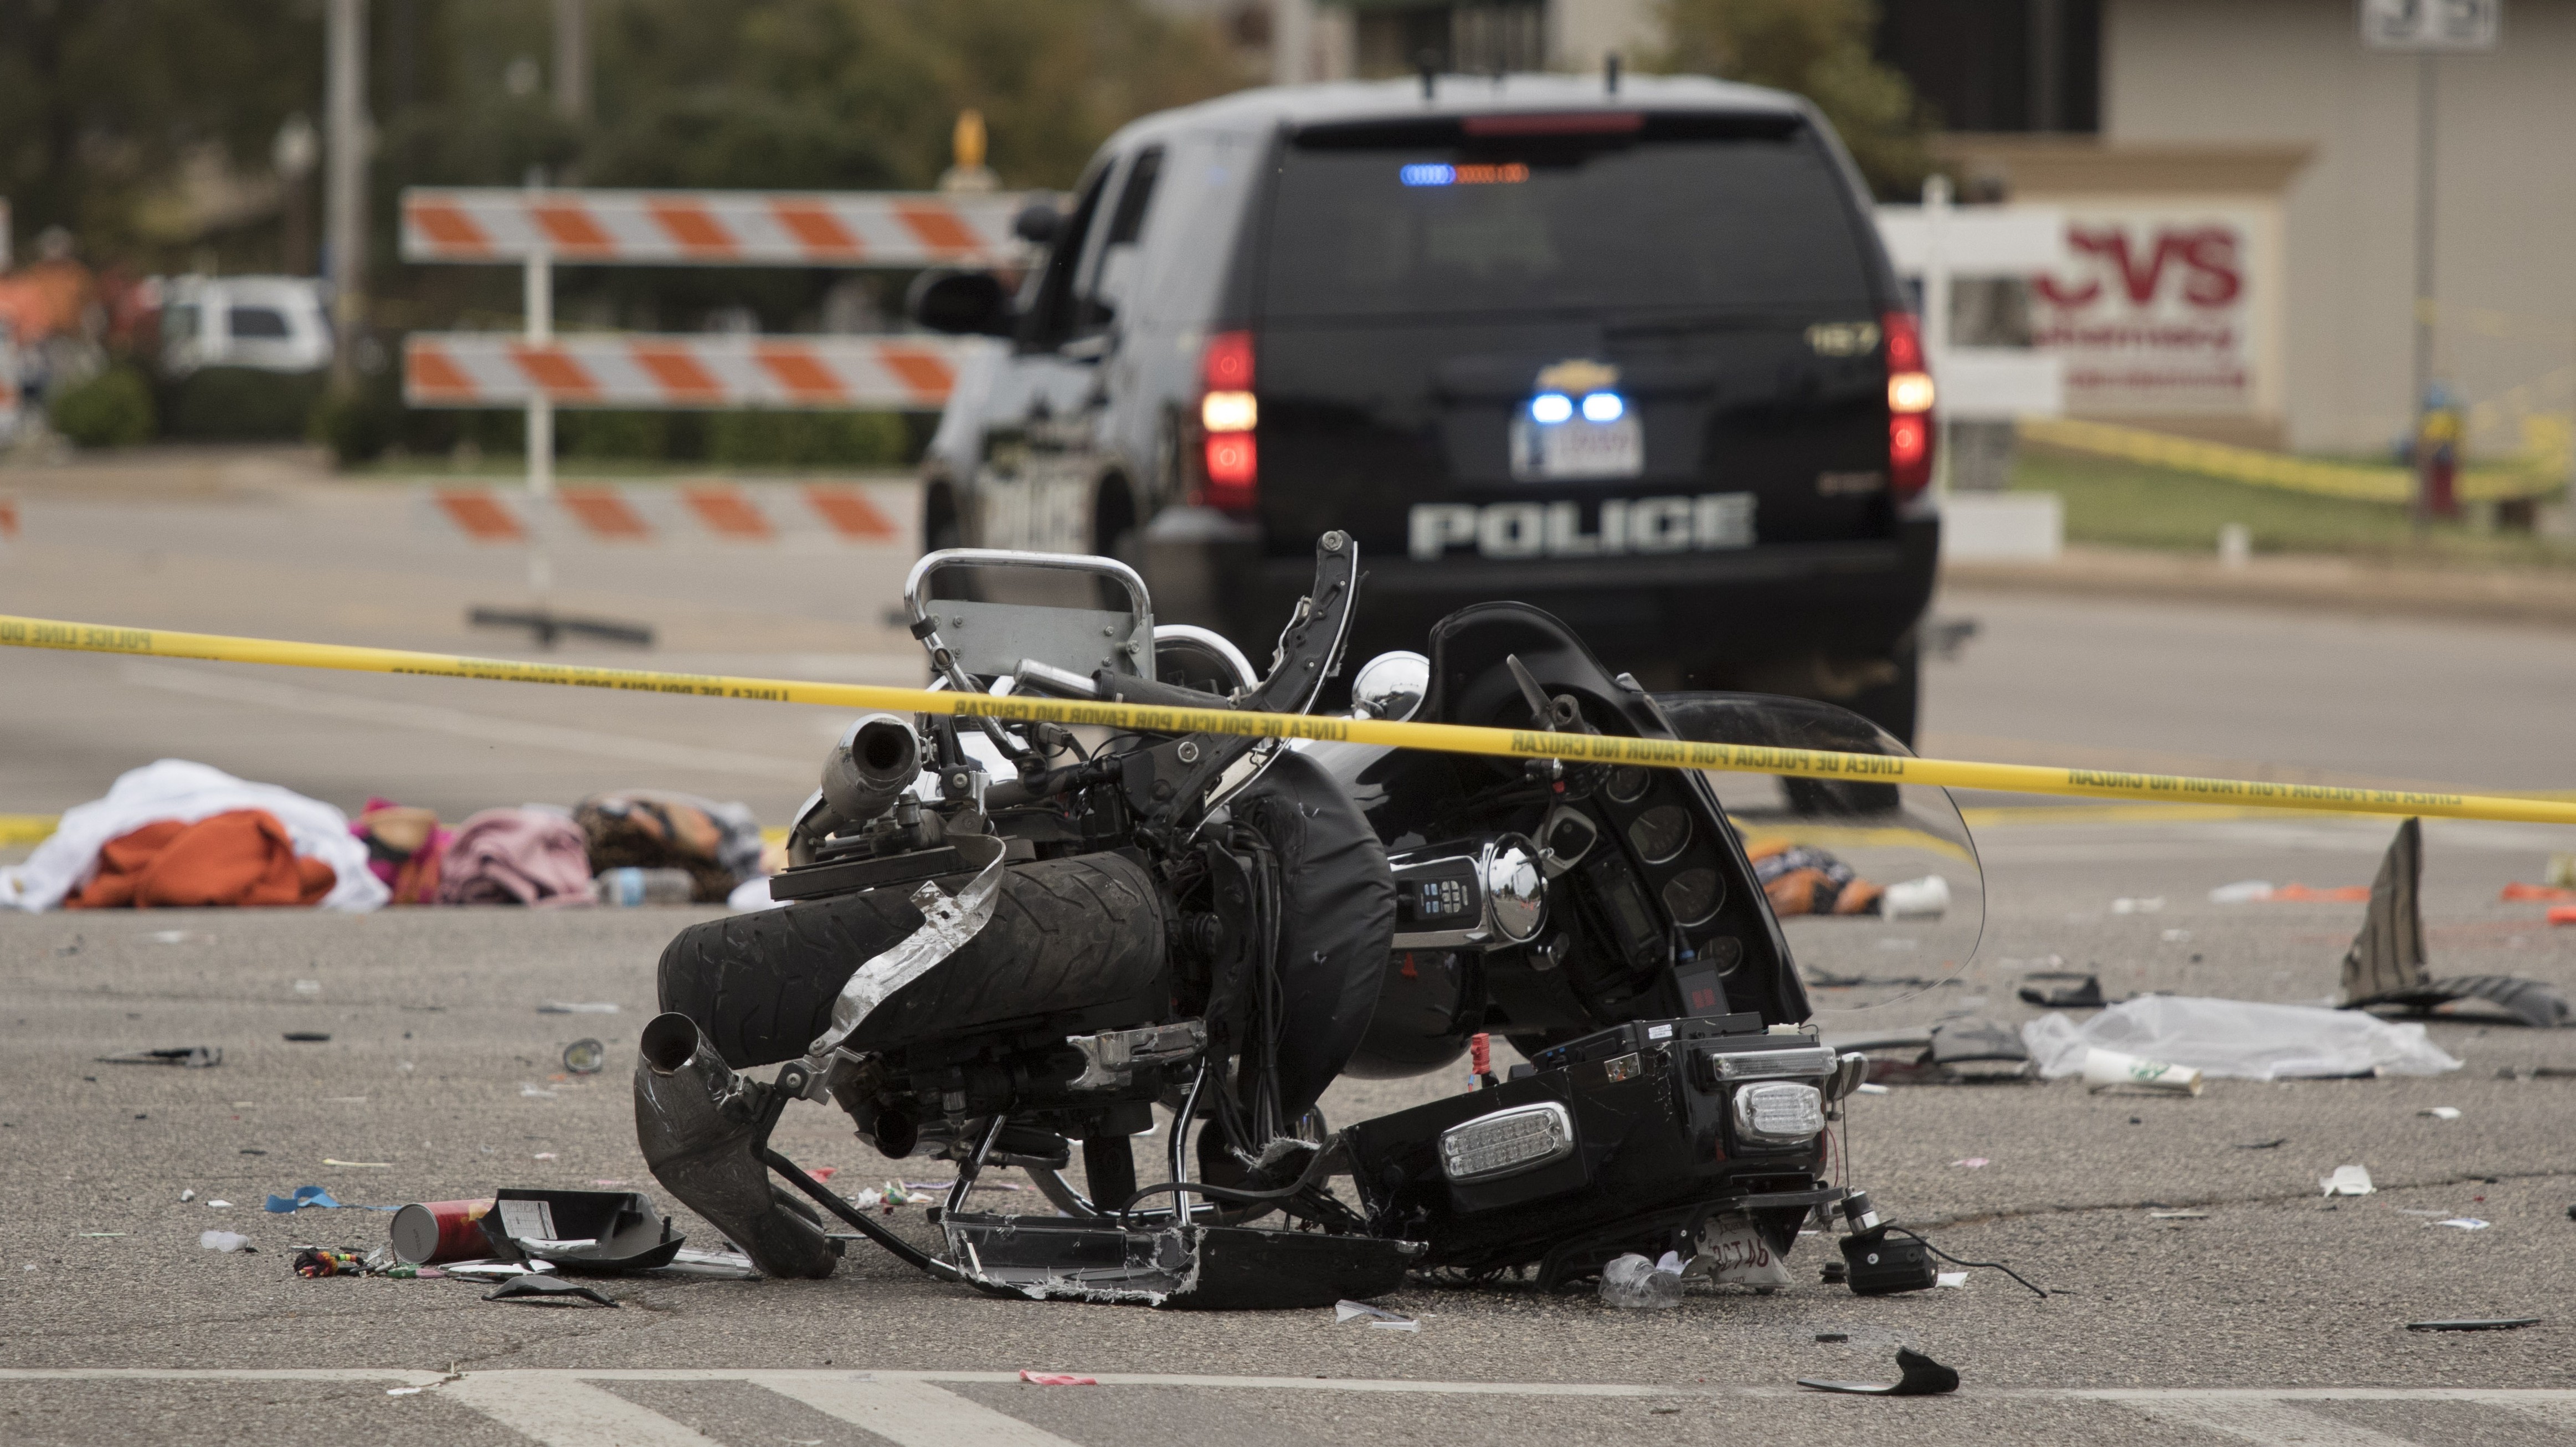 A wrecked police motorcycle lays on the scene after a suspected drunk driver crashed into a crowd of spectators during the Oklahoma State University homecoming parade near the Boone Pickens Stadium.(Getty)